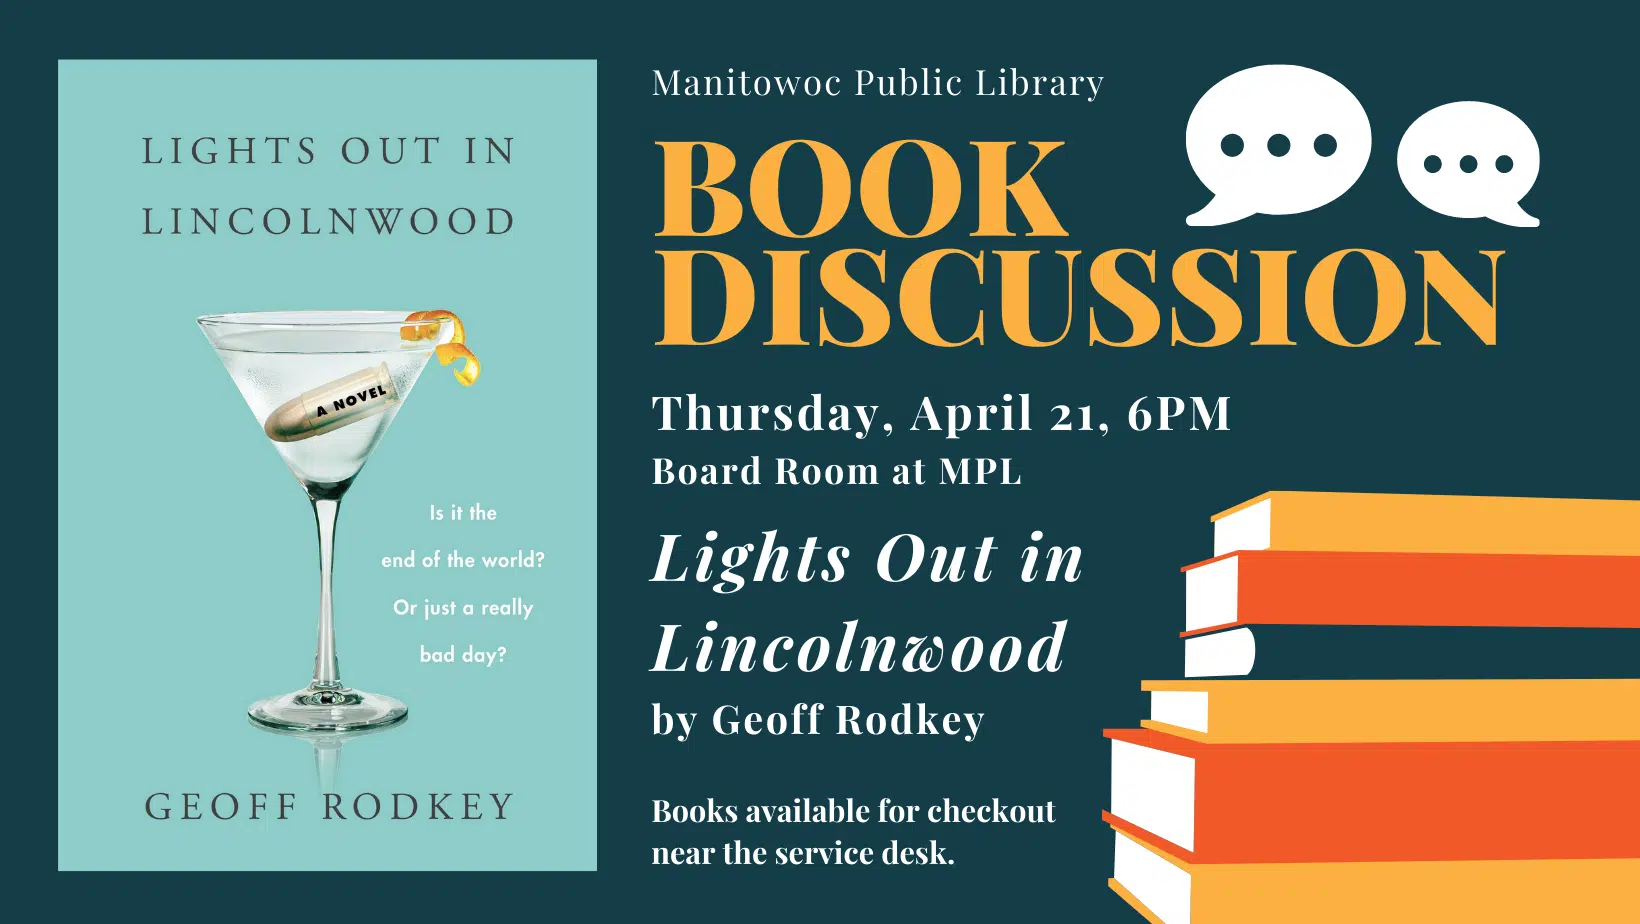 Manitowoc Public Library to Host Book Discussions Later This Month